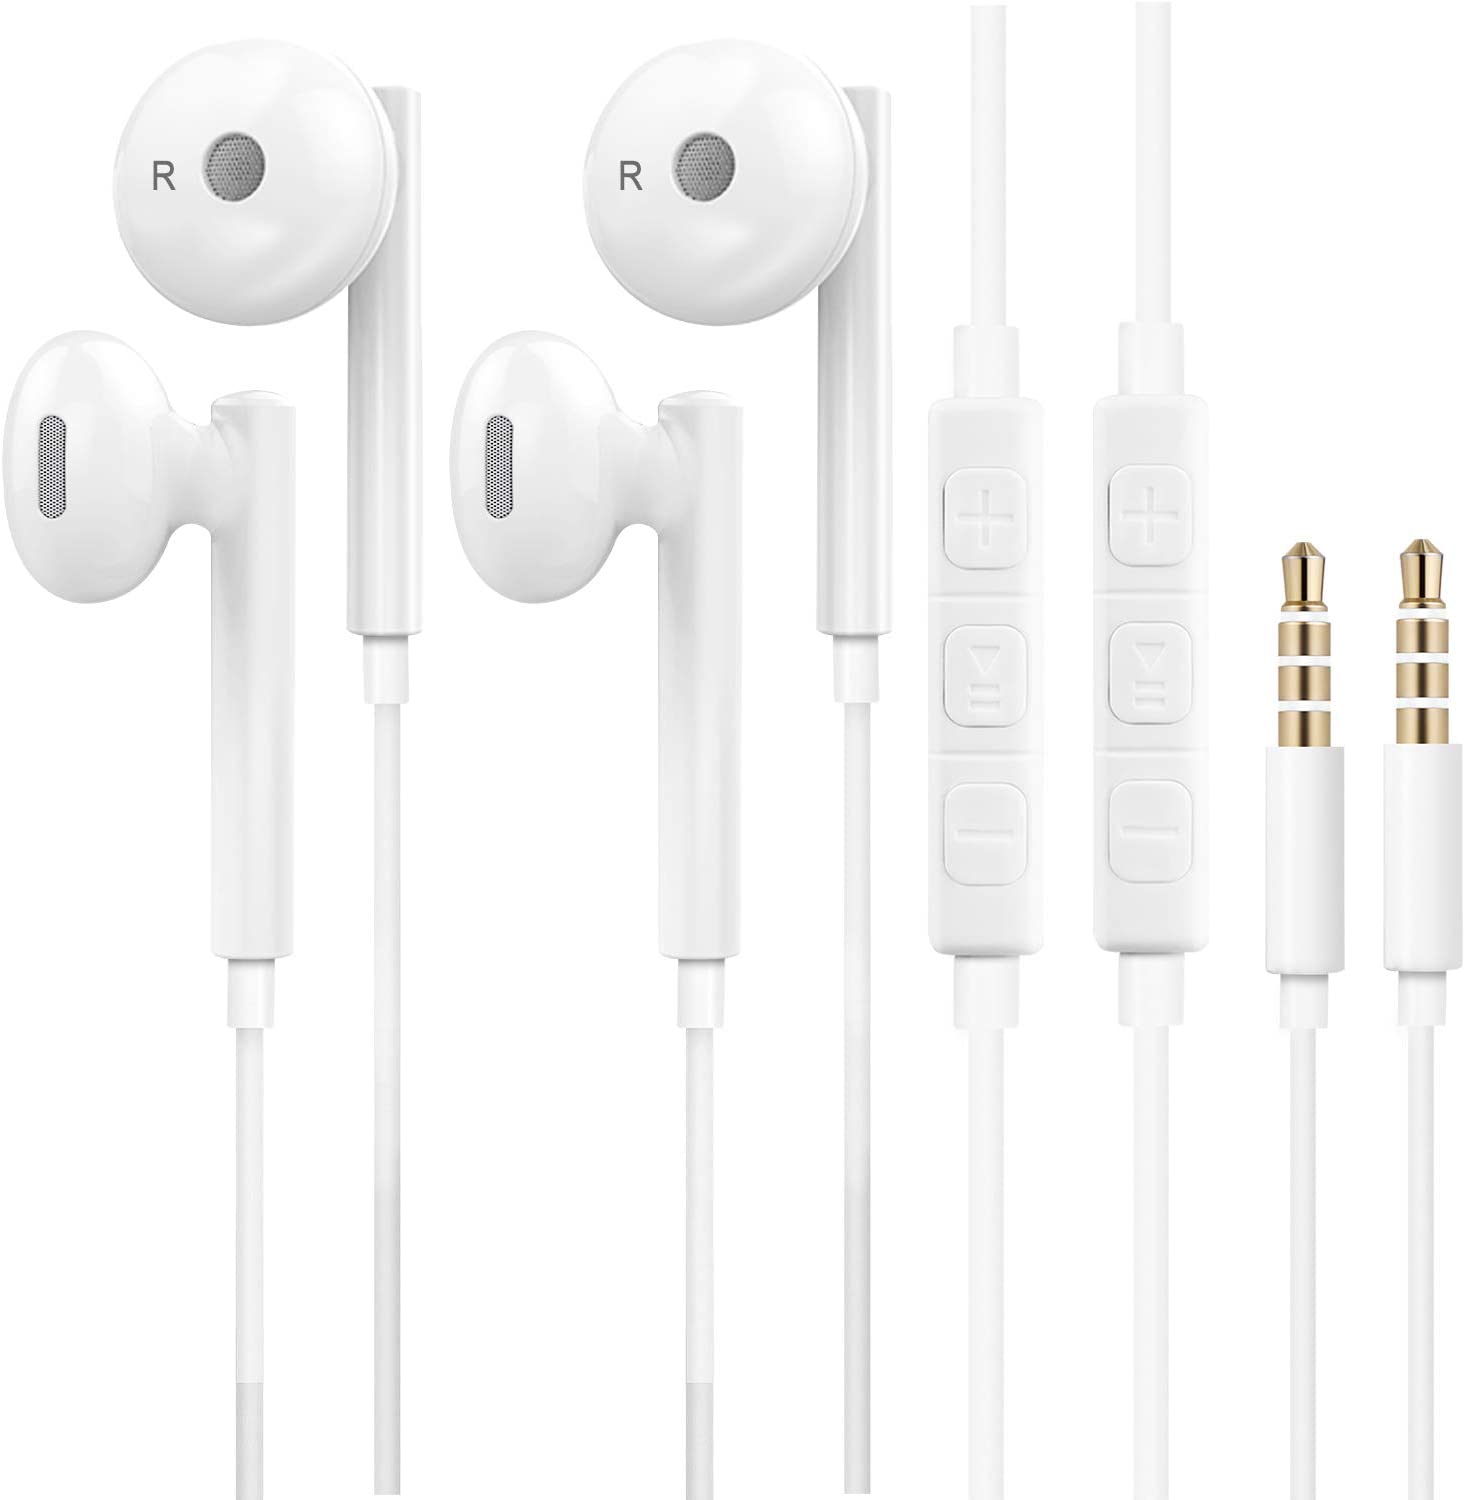 Wired Earbuds Headphones, 3.5mm Jack, Noise Canceling Earphones with Built-in Mic&Volume Control Compatible with All 3.5mm Connector Devices